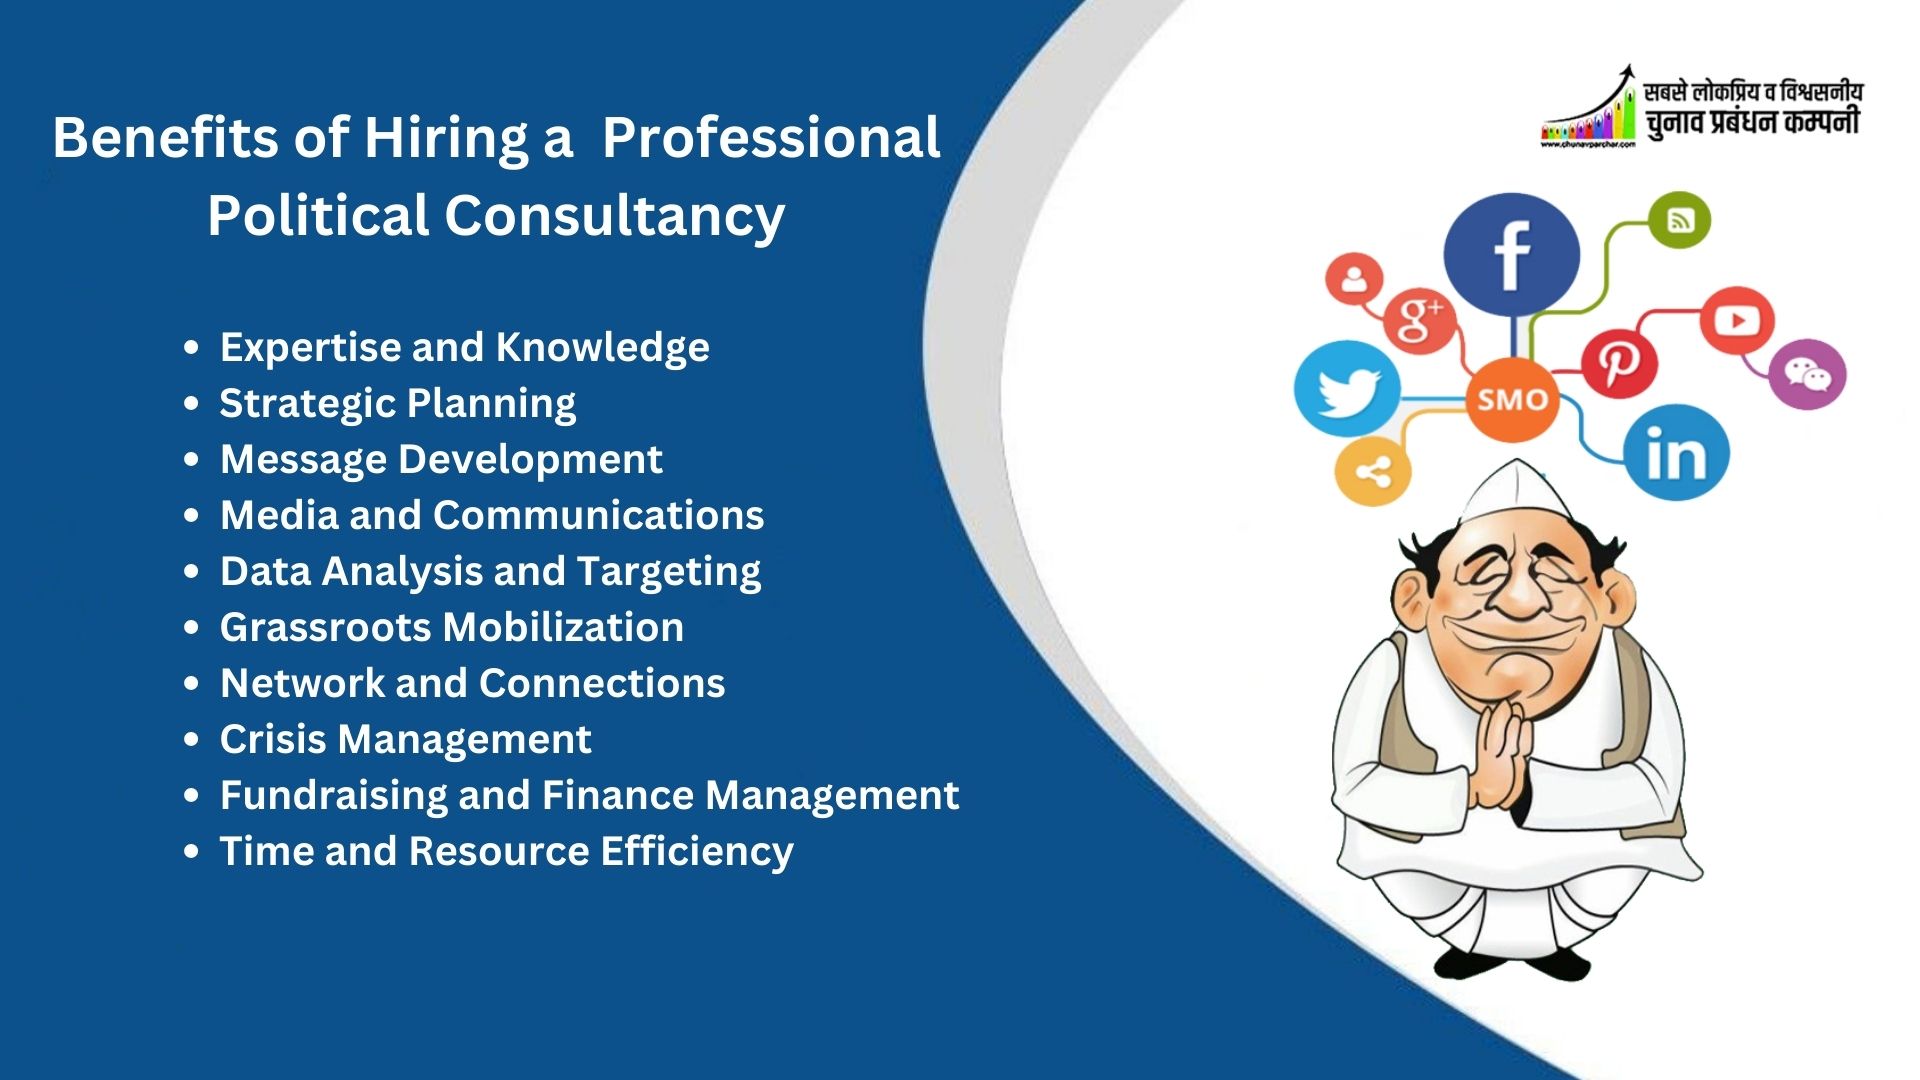 Benefits of Hiring a Professional Political Consultancy